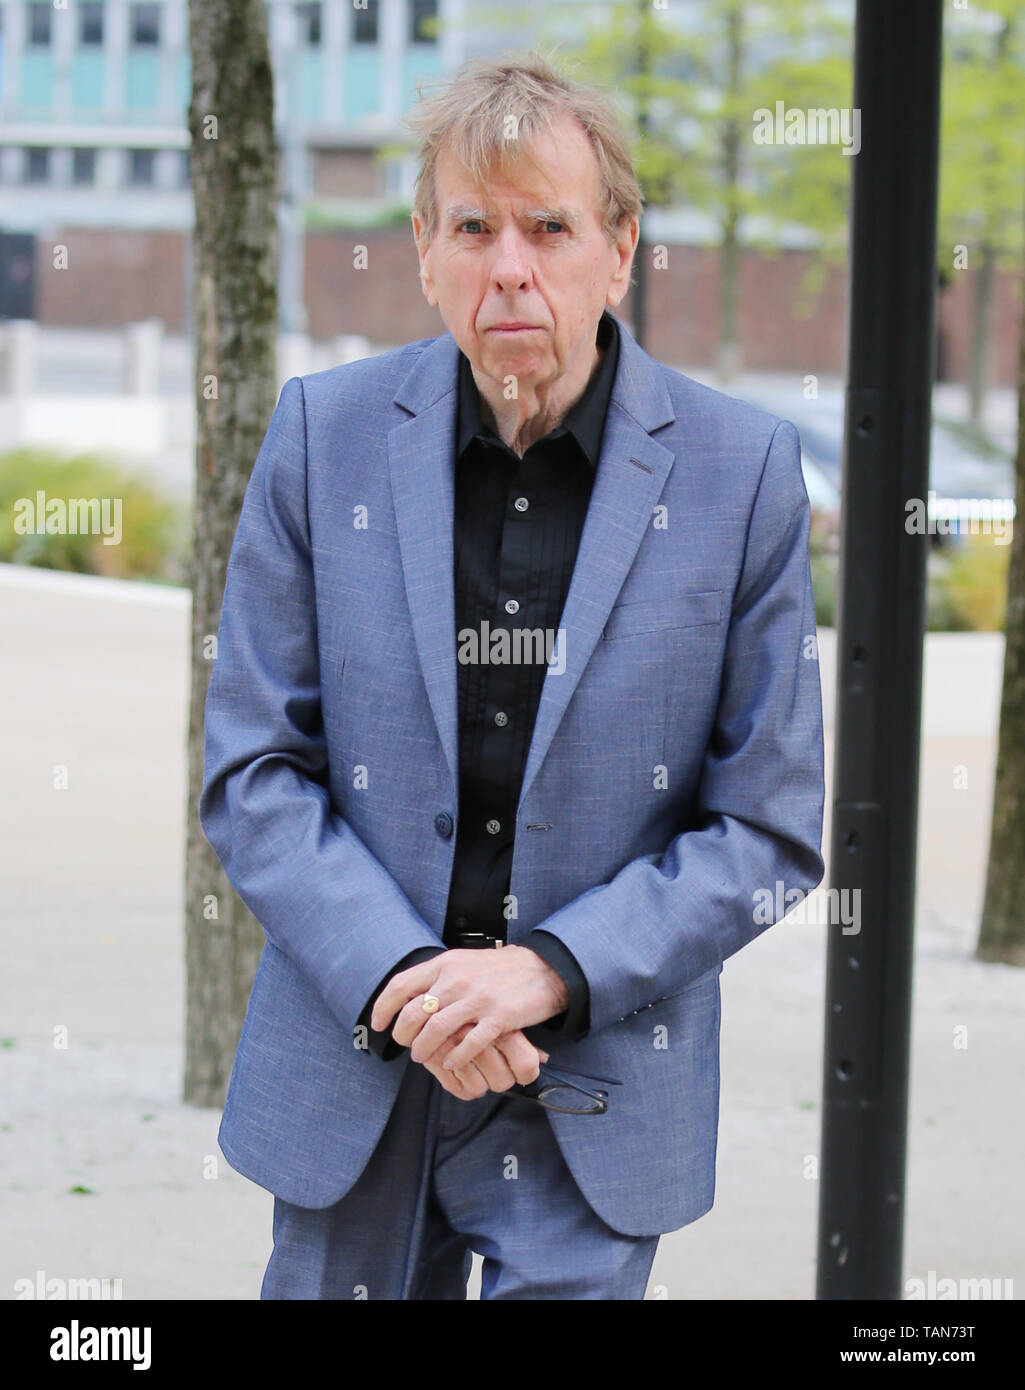 Timothy Spall outside ITV Studios  Featuring: Timothy Spall Where: London, United Kingdom When: 25 Apr 2019 Credit: Rocky/WENN.com Stock Photo